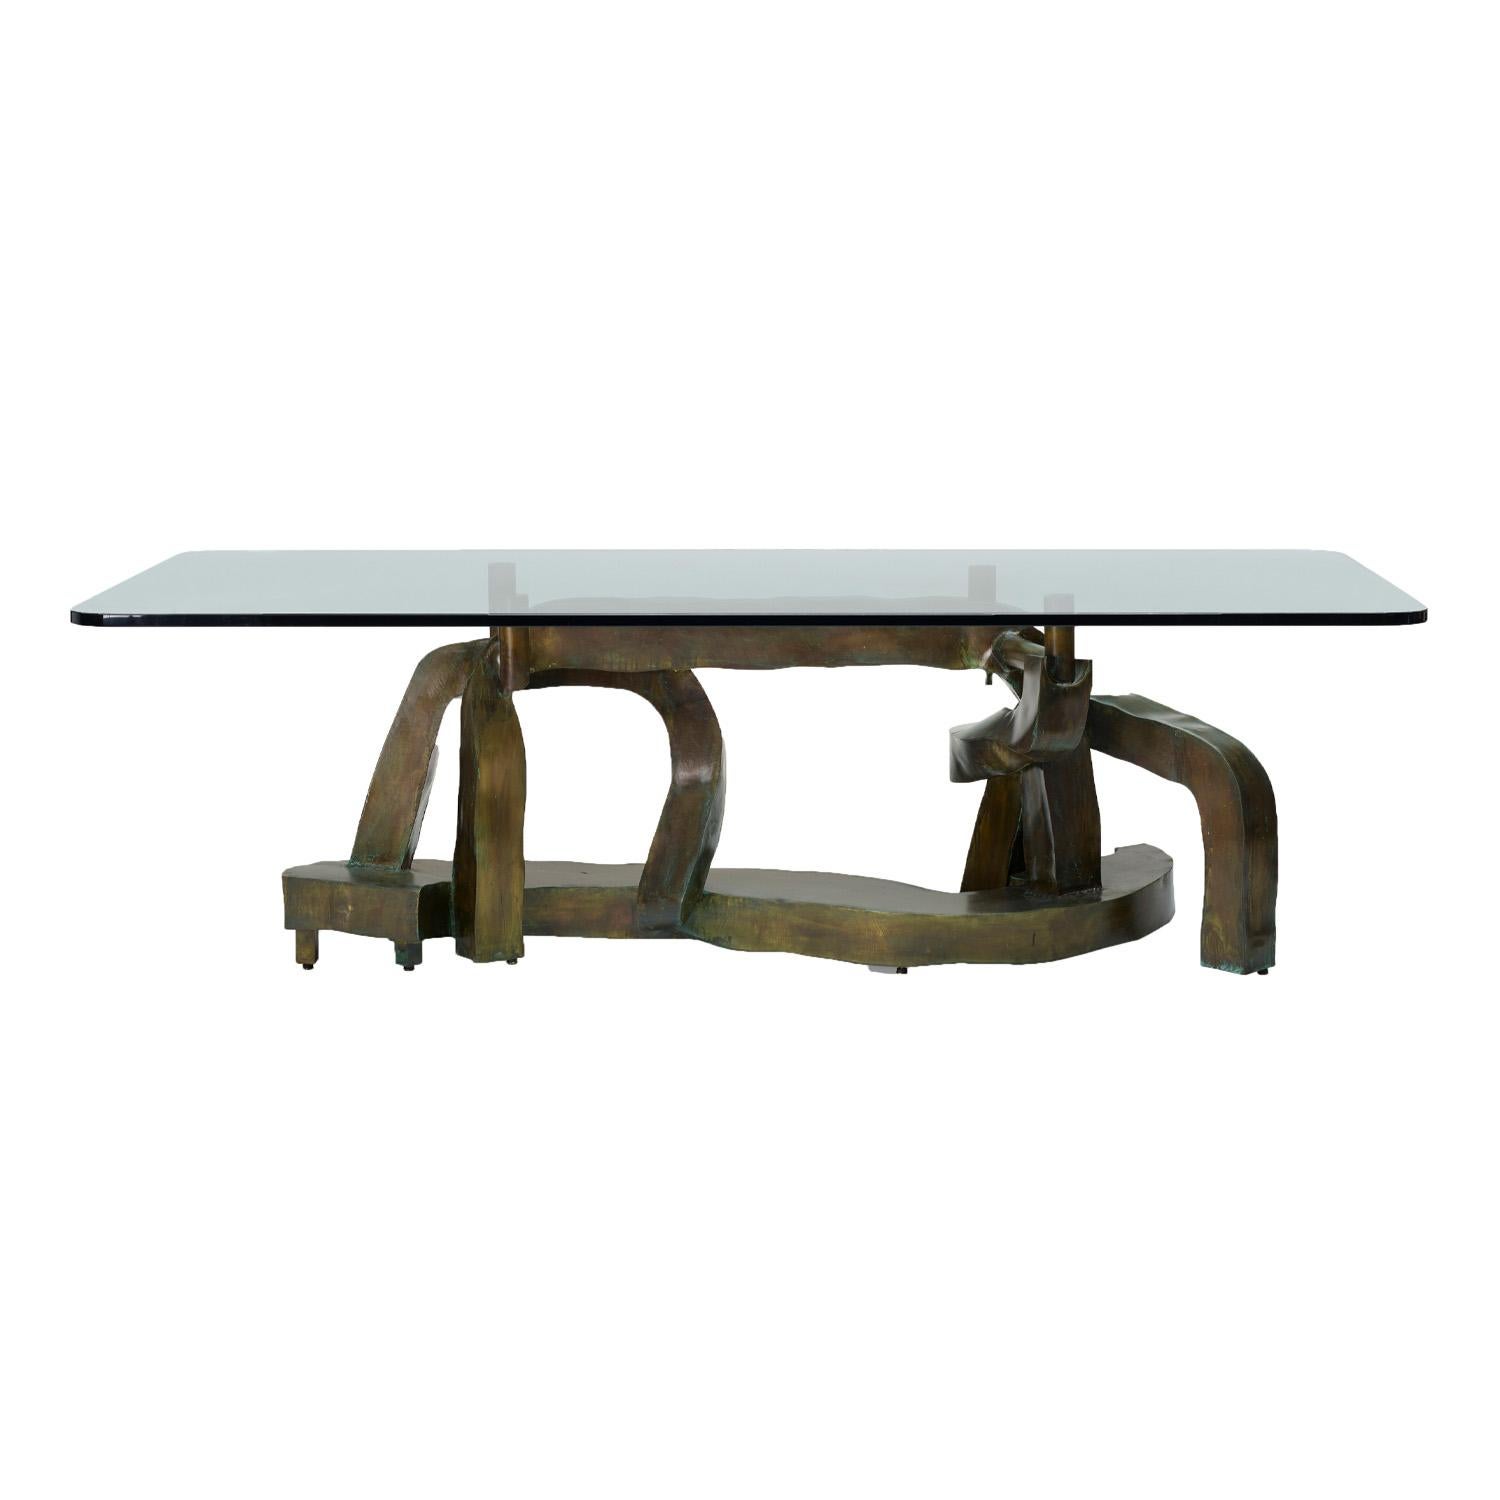 Rare and important hand-welded and patinated bronze sculpture dining table “Symphony” with glass top by Philip and Kelvin LaVerne, American 1970’s (signed “Philip Kelvin LaVerne”). According to Kelvin LaVerne, only 3 were made. Philip and Kelvin